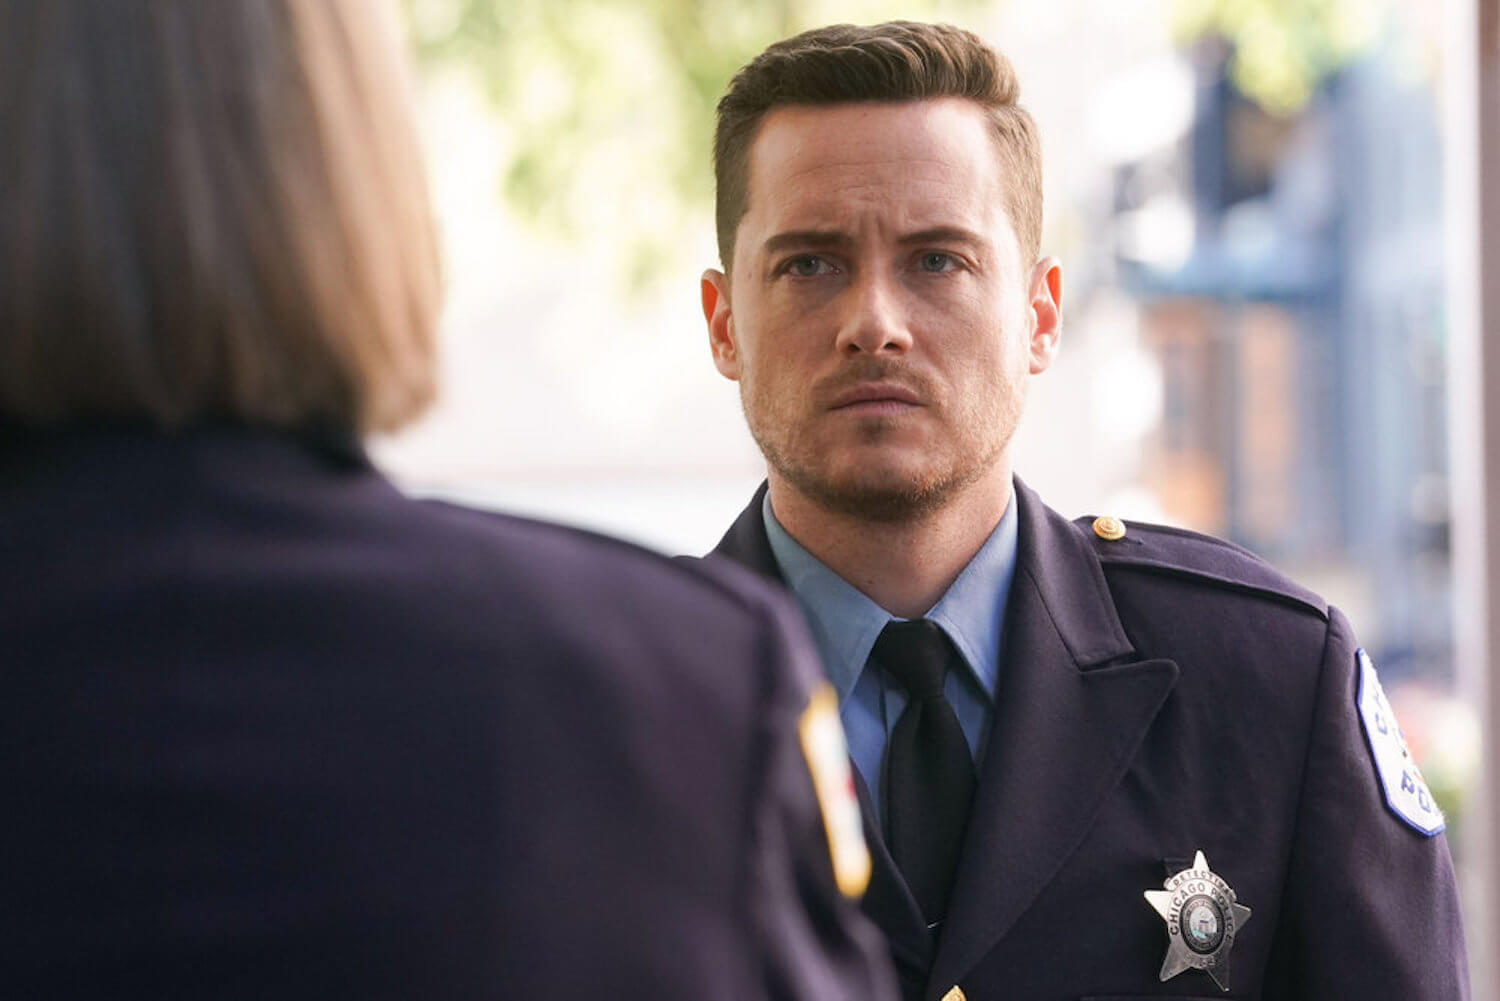 Jay Halstead actor Jesse Lee Soffer dressed in a suit in 'Chicago P.D.'